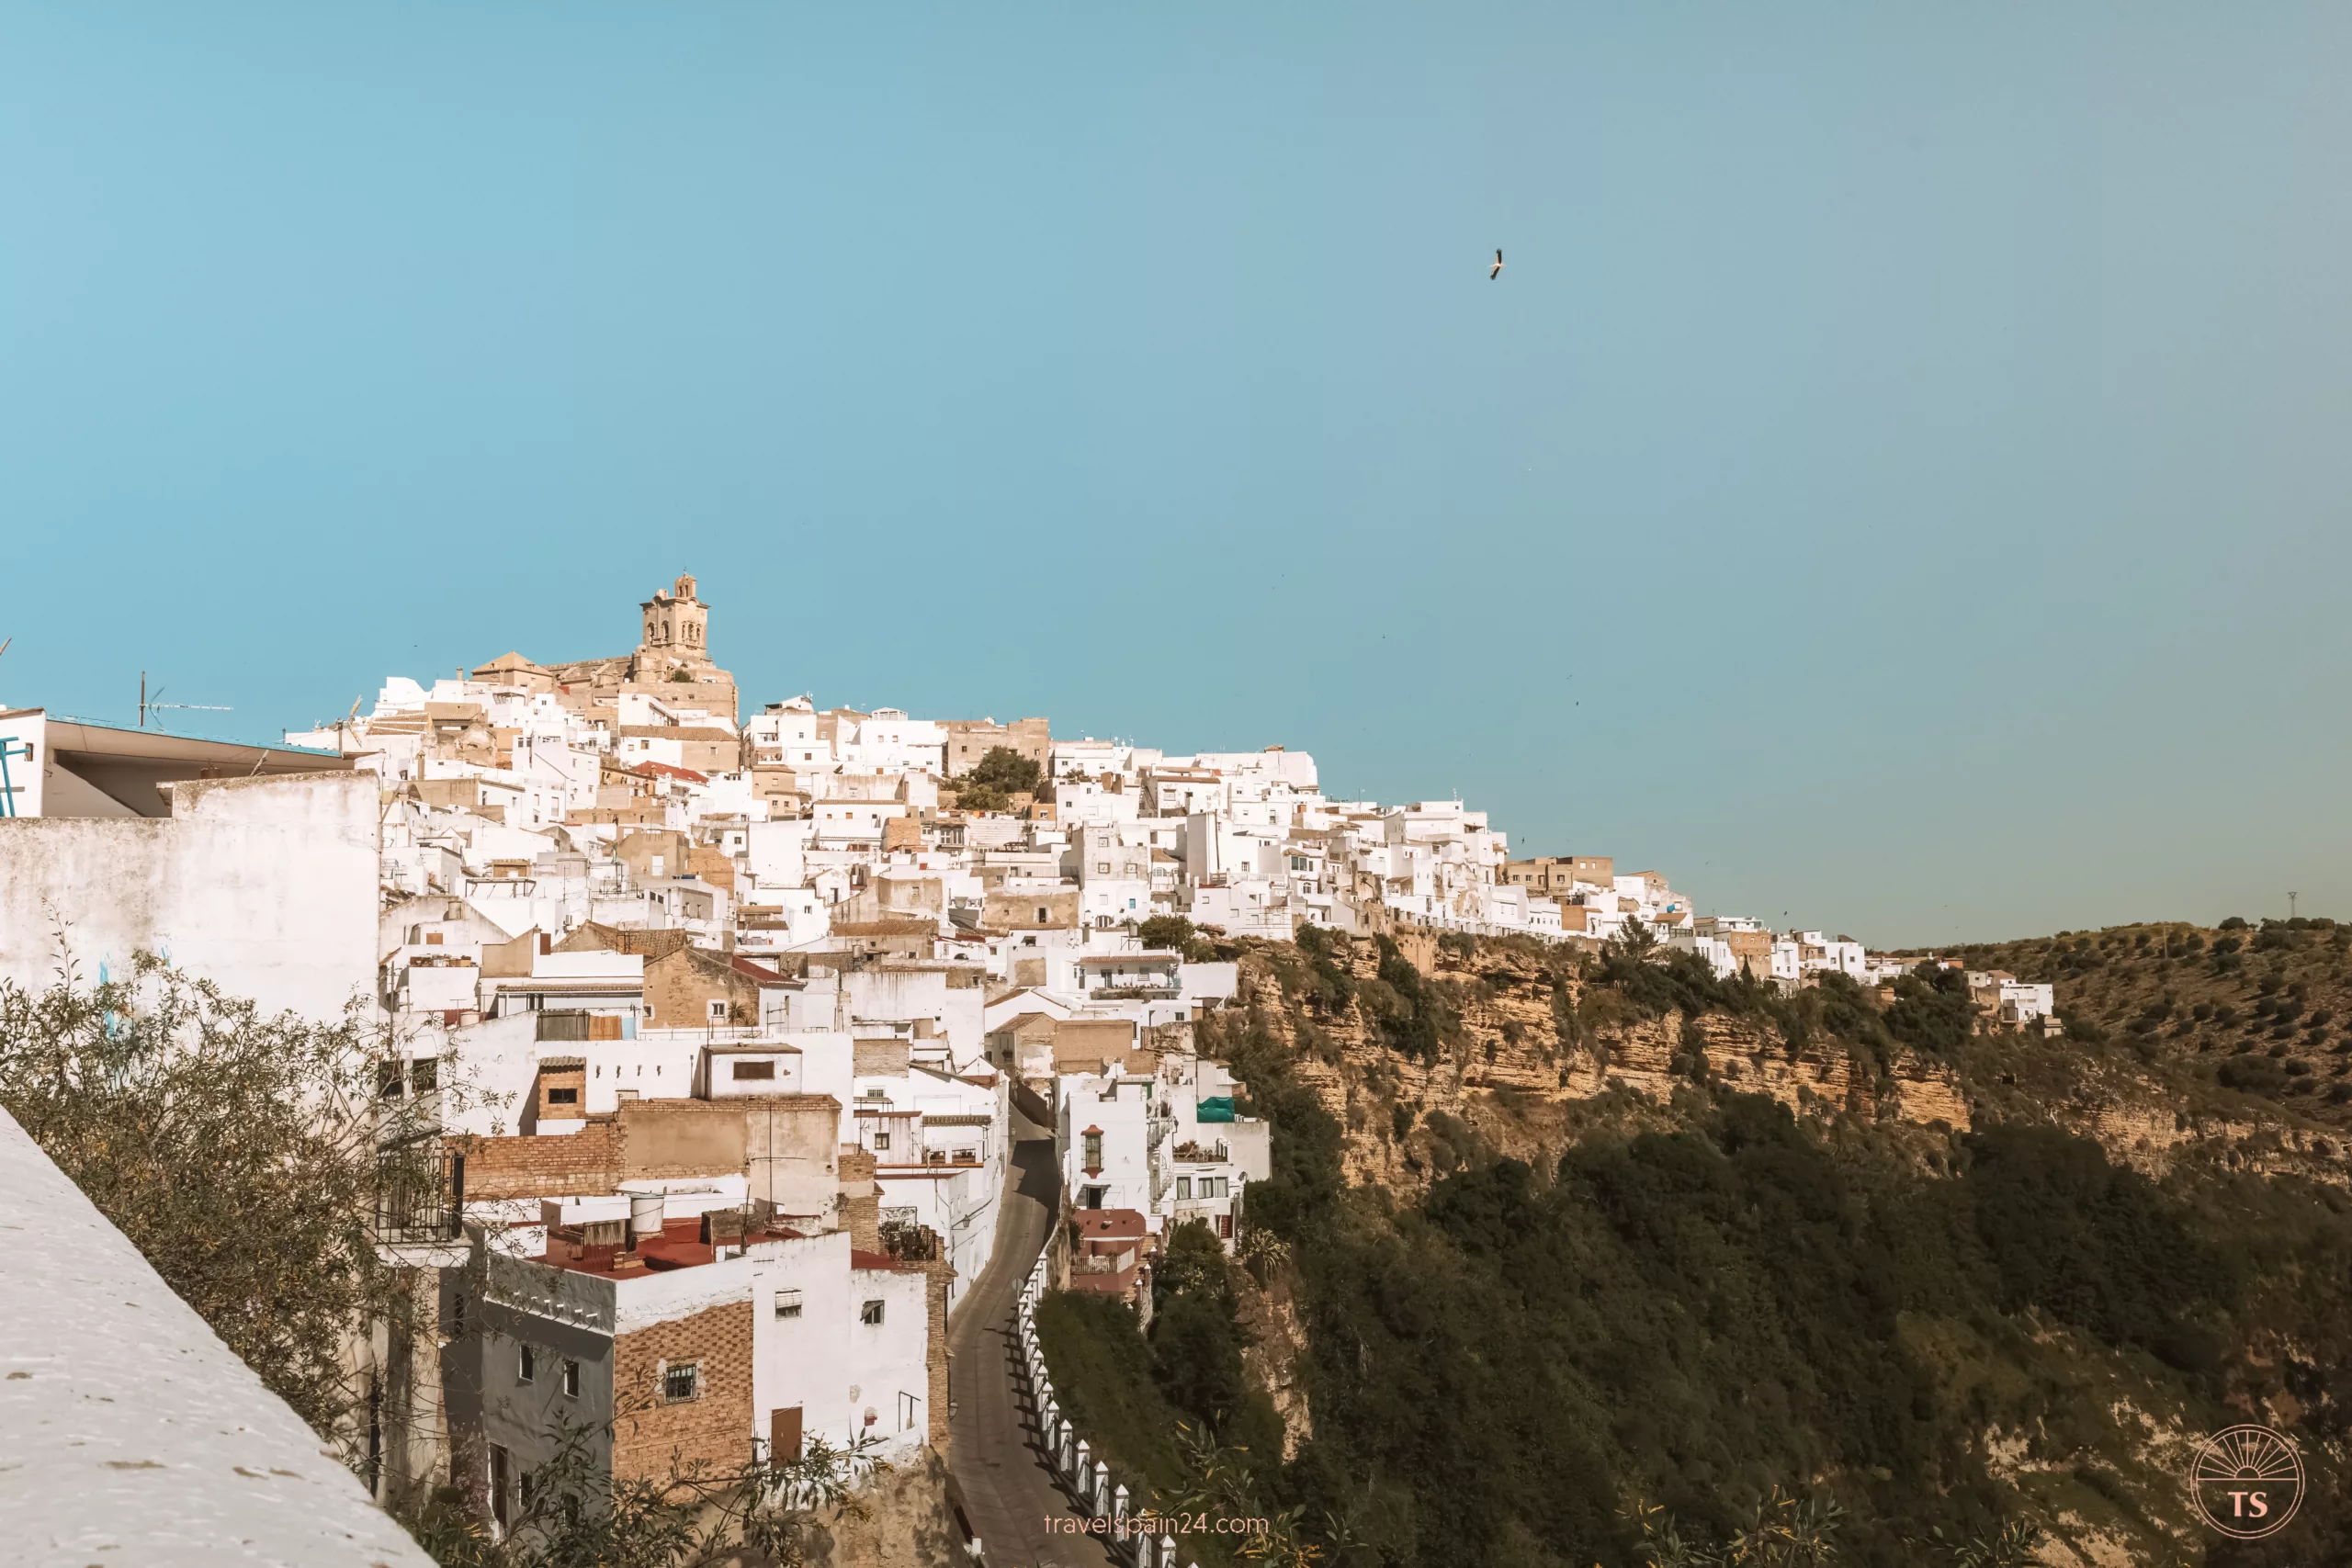 Panoramic view from Mirador Peña Vieja in Arcos de la Frontera, showing white houses on the cliff. A stork flies in the distance.